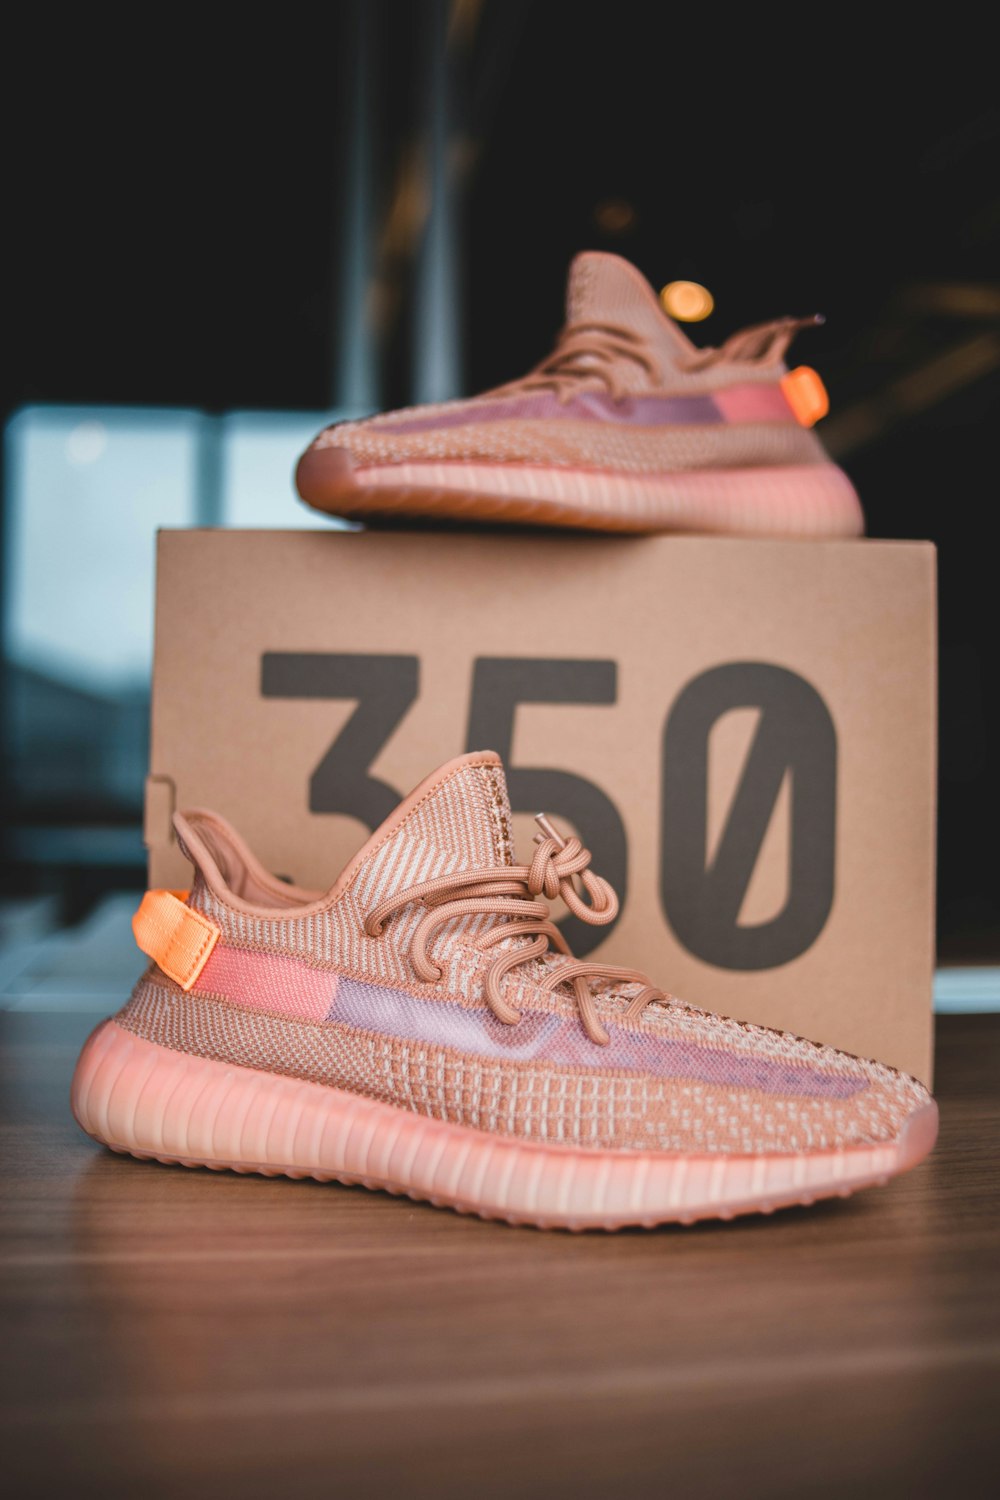 Pair of pink adidas yeezy boost 350 on brown wooden surface photo – Free  Shoes Image on Unsplash